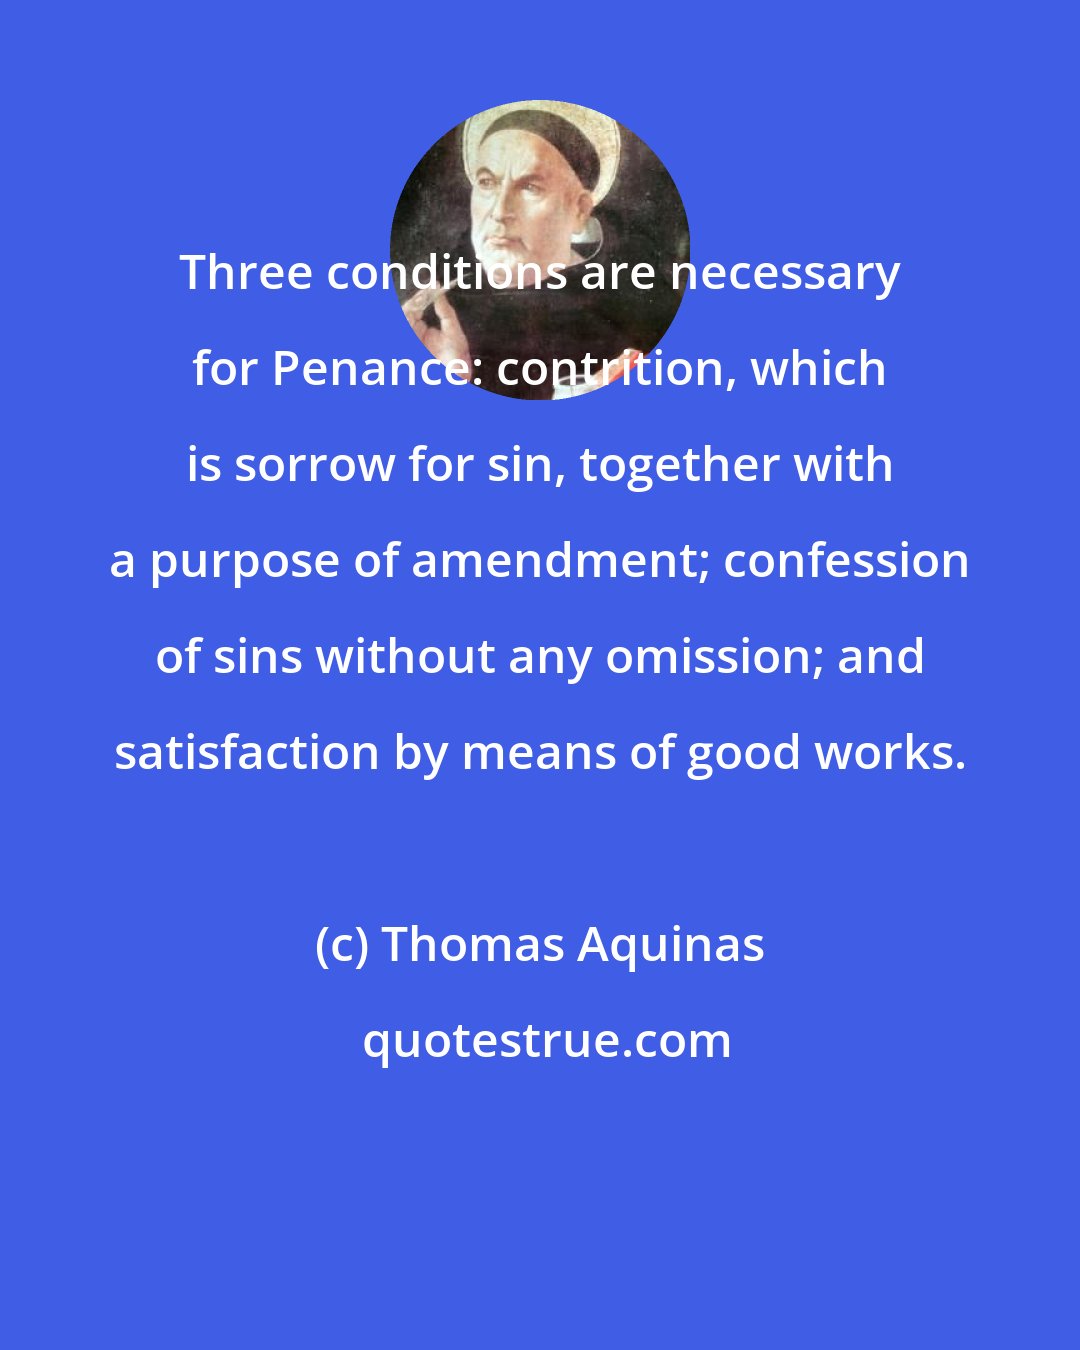 Thomas Aquinas: Three conditions are necessary for Penance: contrition, which is sorrow for sin, together with a purpose of amendment; confession of sins without any omission; and satisfaction by means of good works.